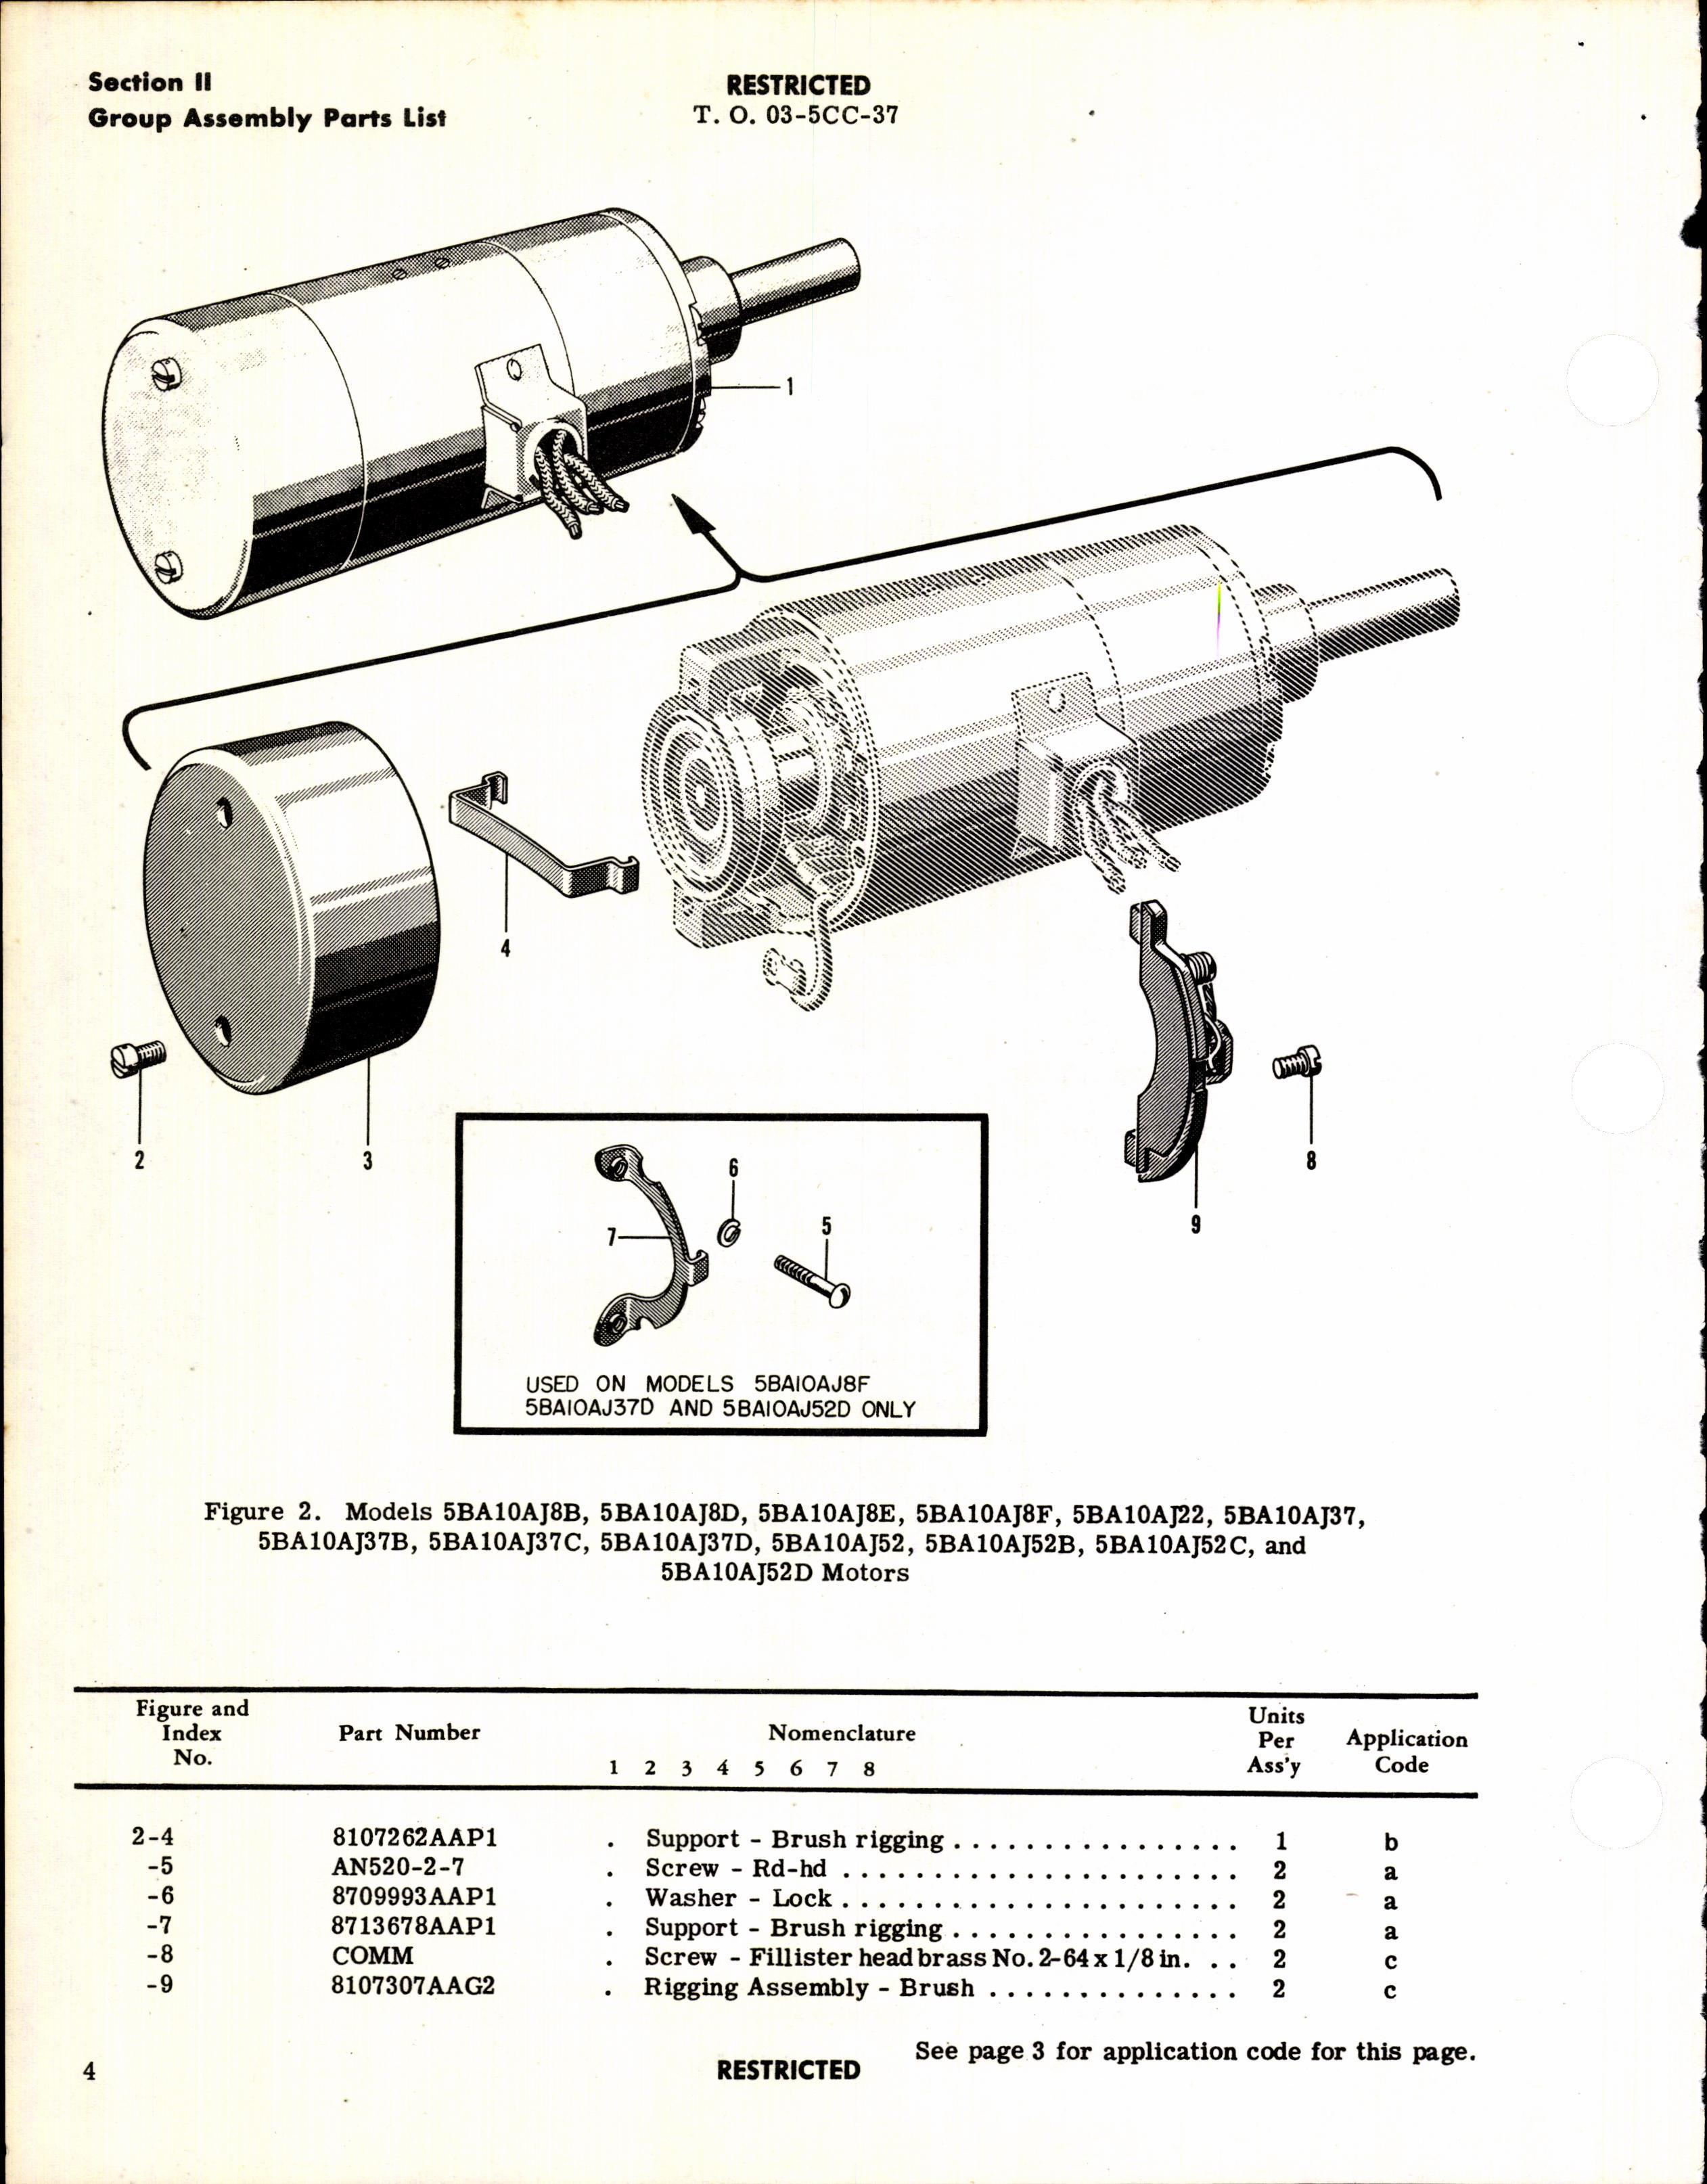 Sample page 6 from AirCorps Library document: Parts Catalog for General Electric Series 5BA10 Aircraft Motor